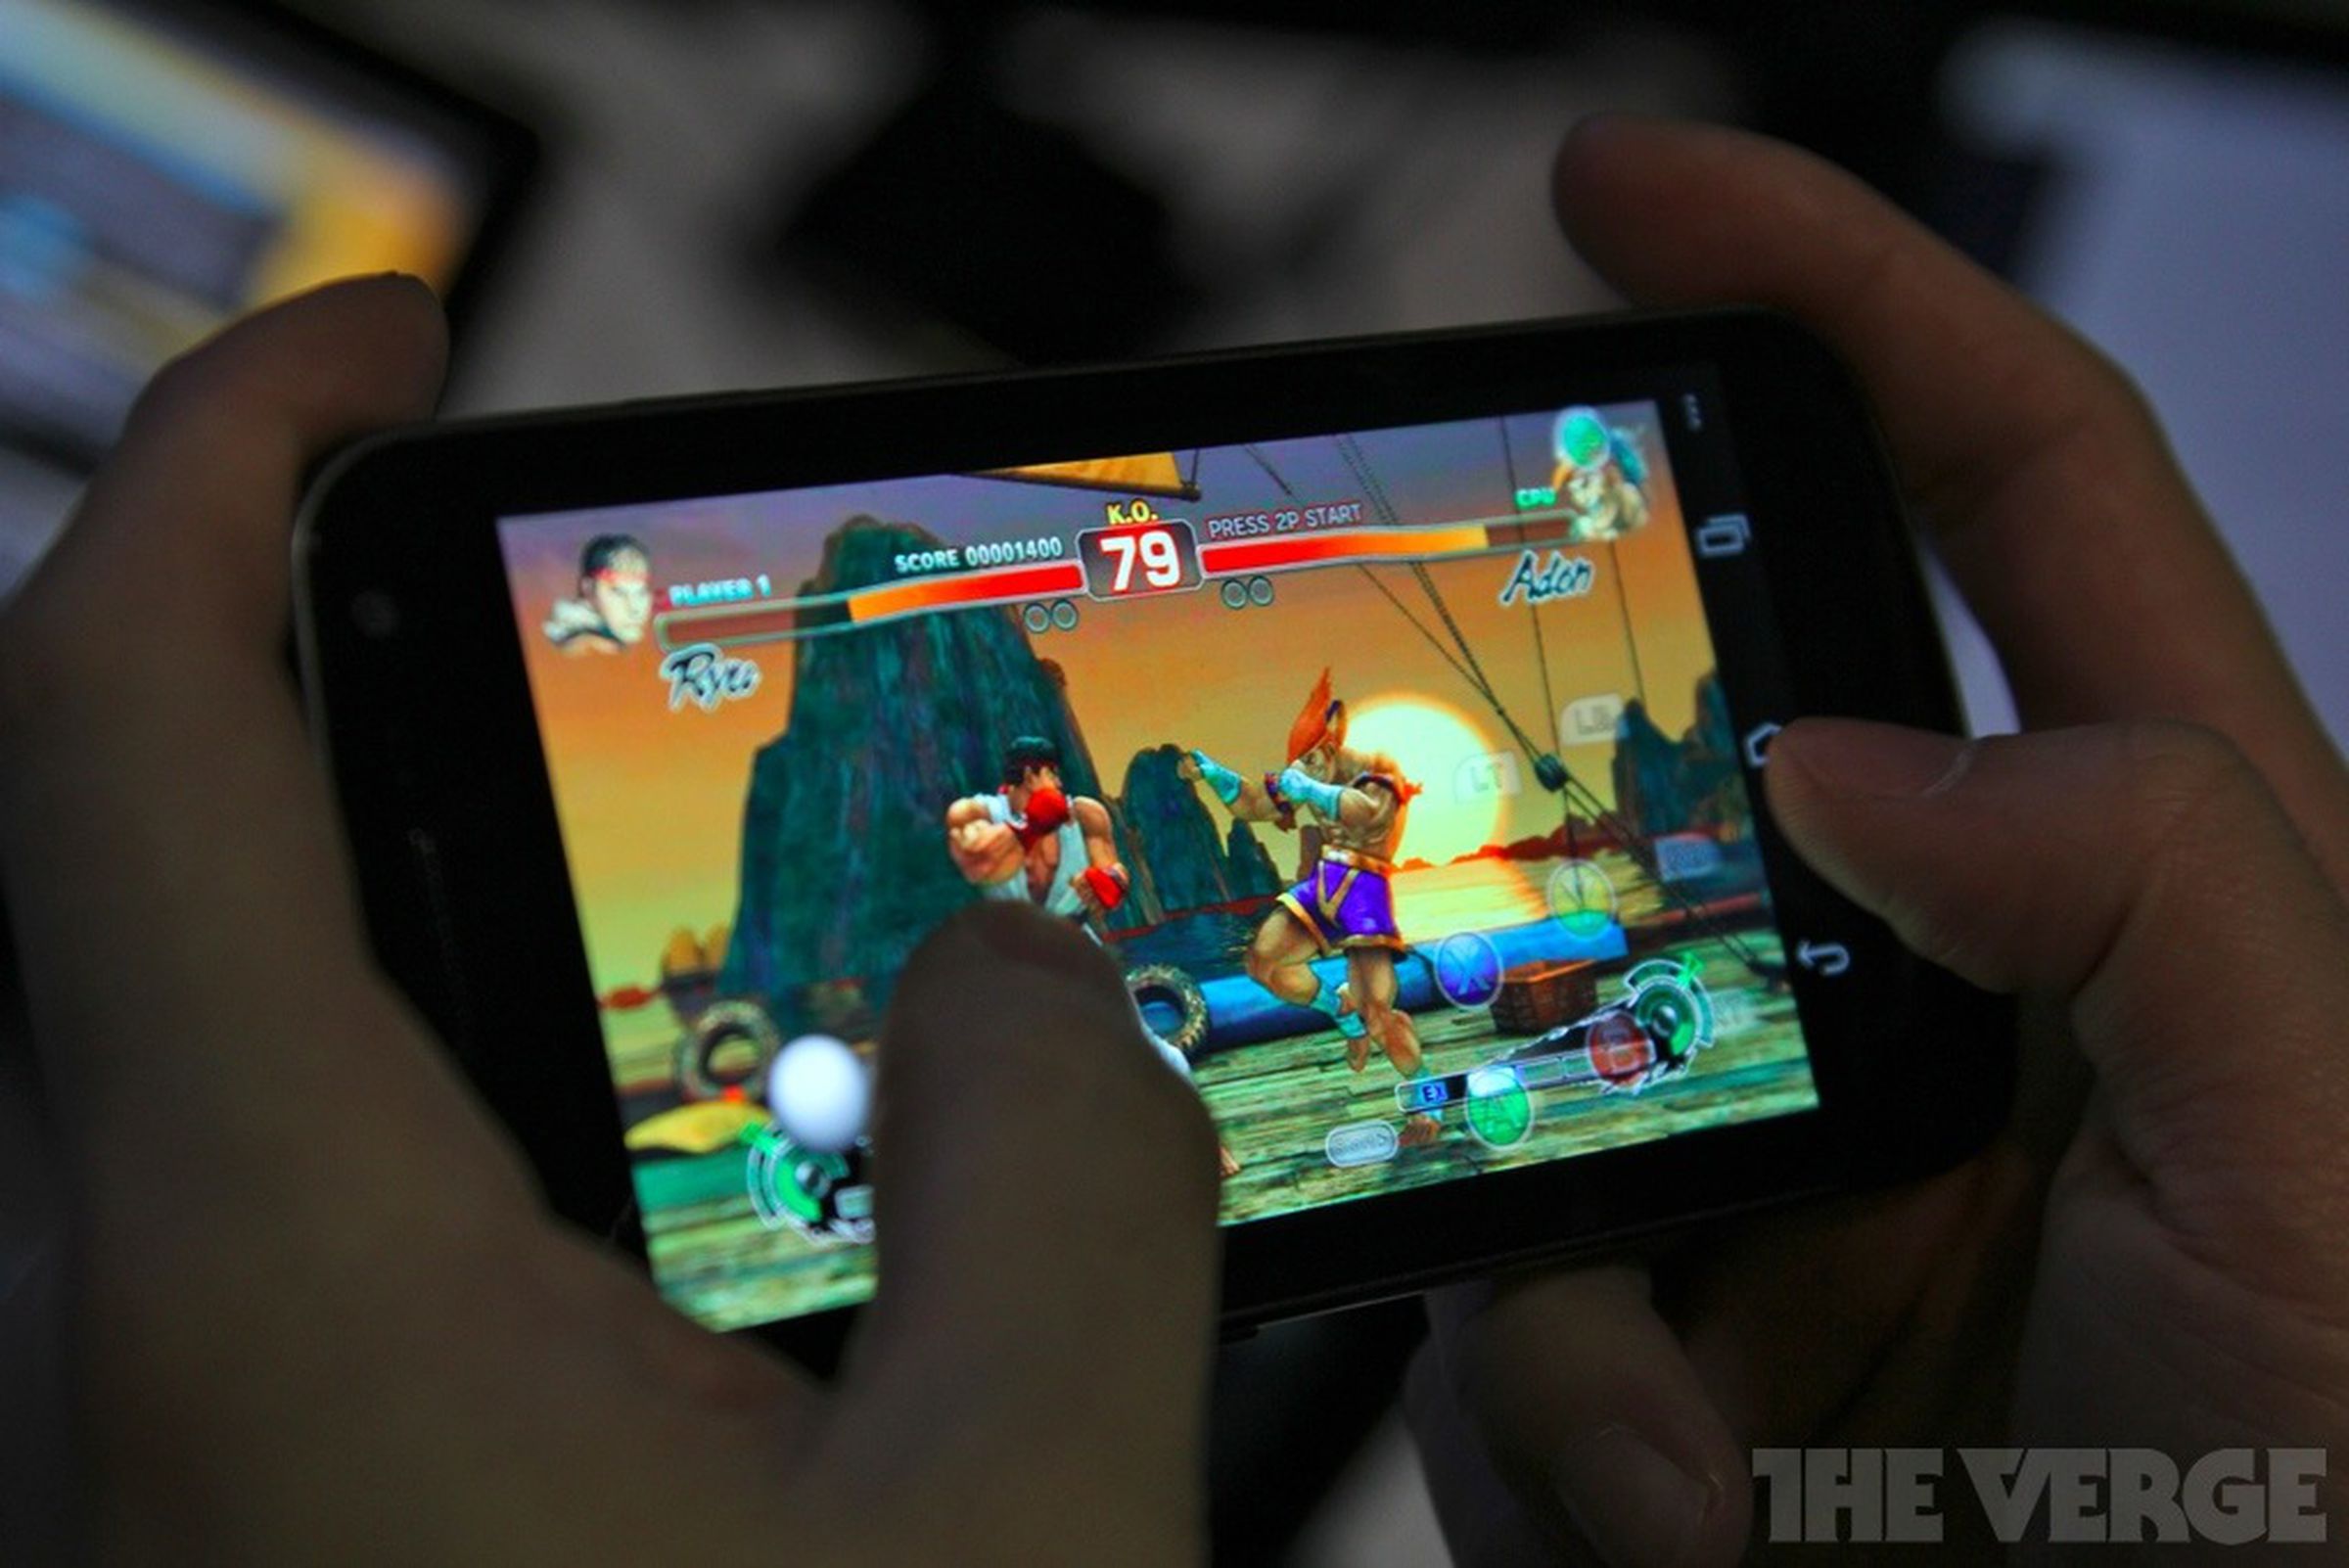 Ubitus cloud gaming service at GTC 2012 (hands-on pictures)